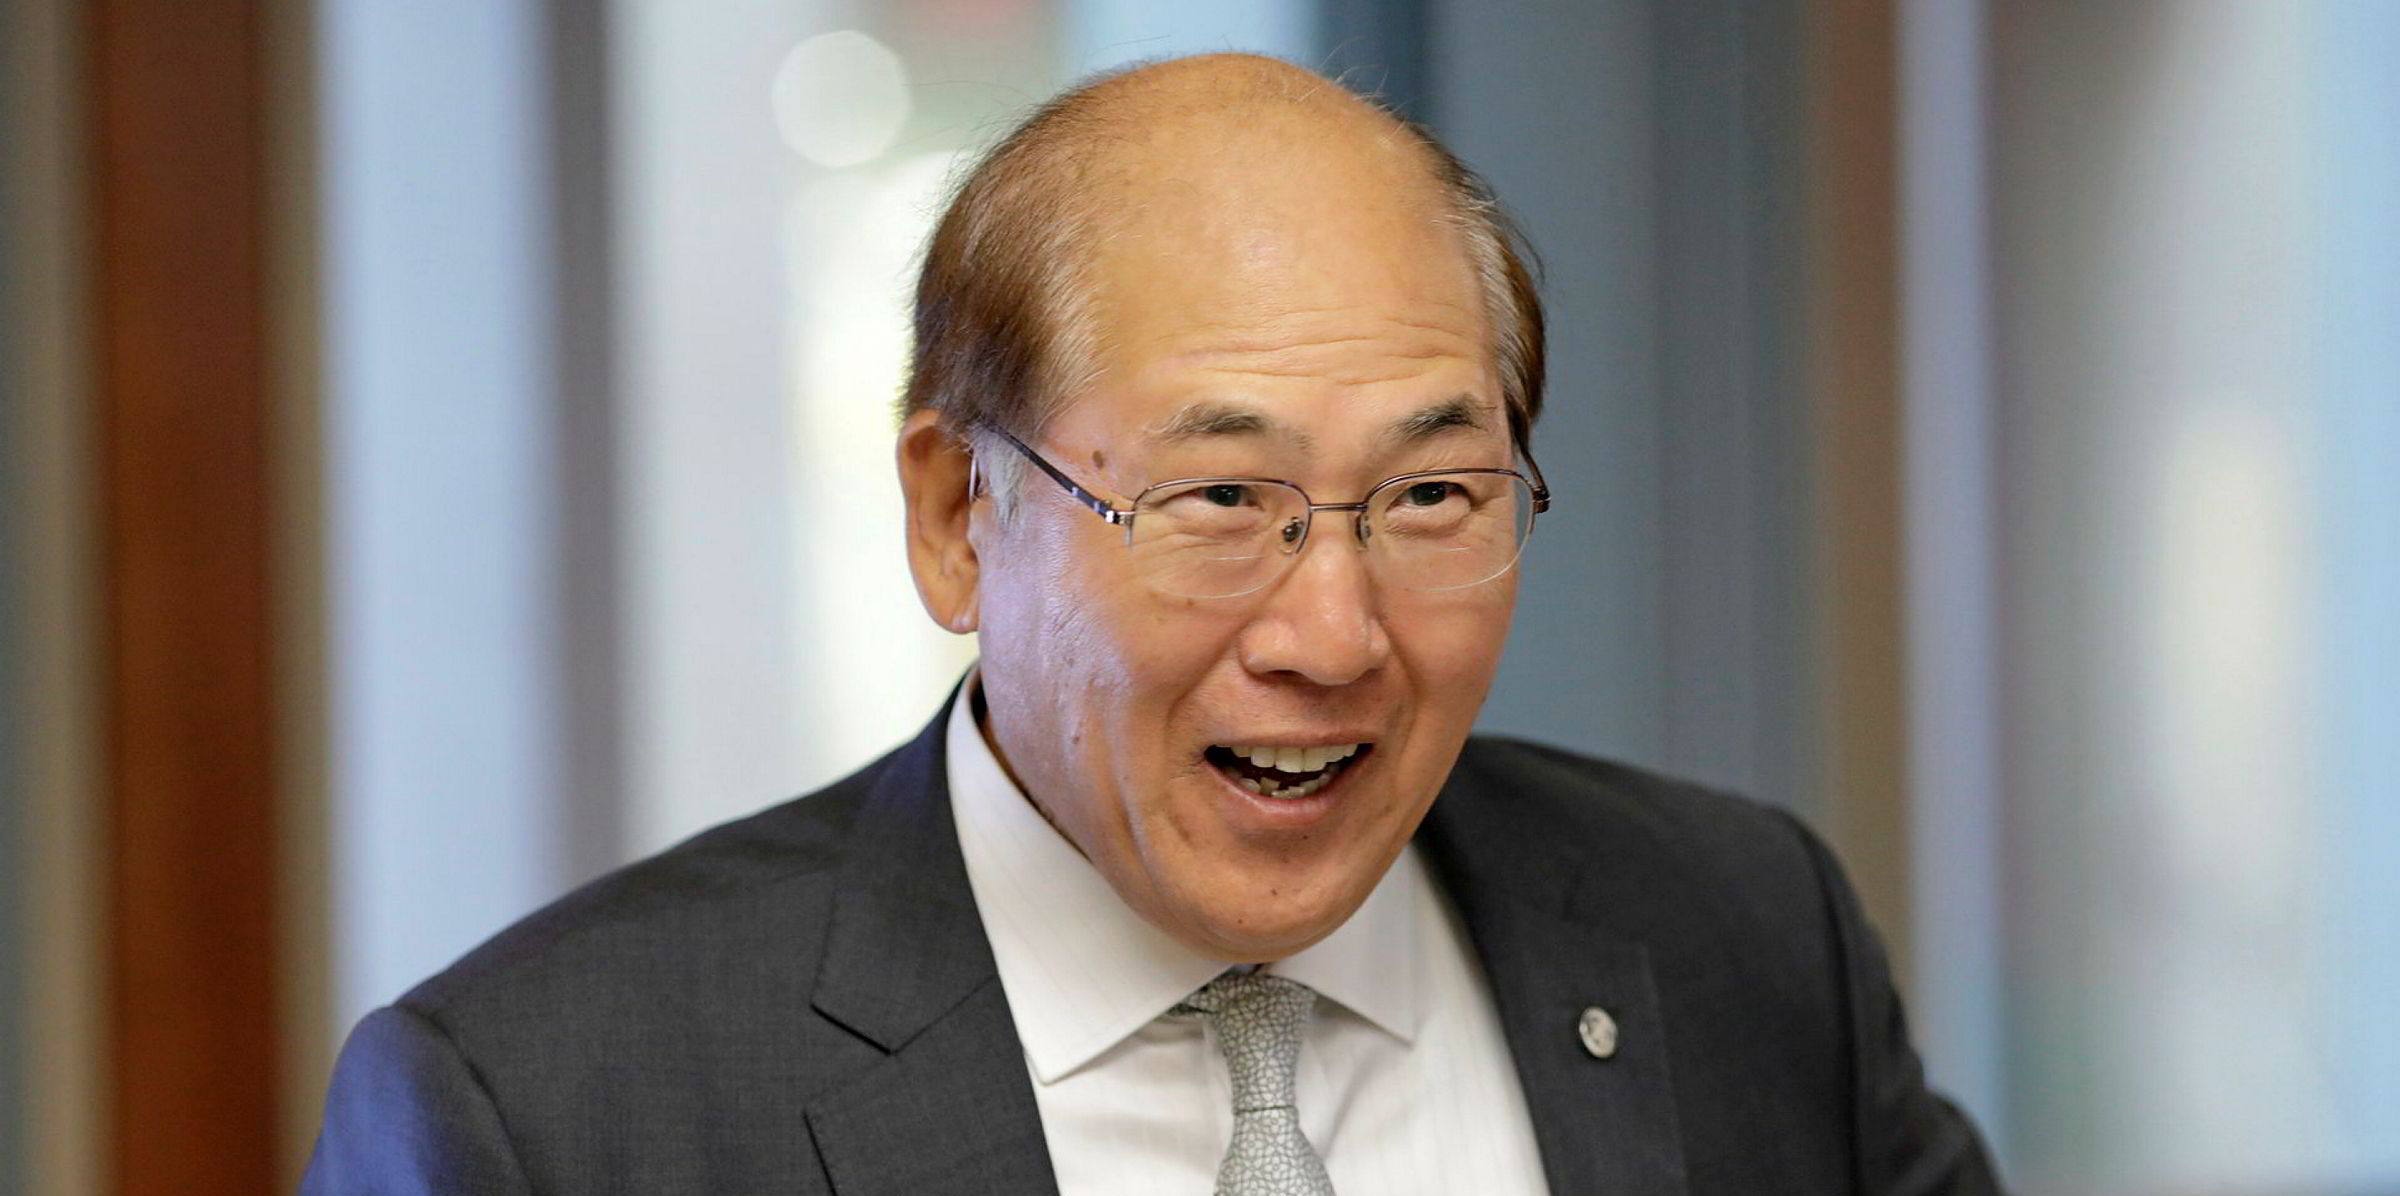 Kitack Lim re-elected as IMO secretary-general | TradeWinds